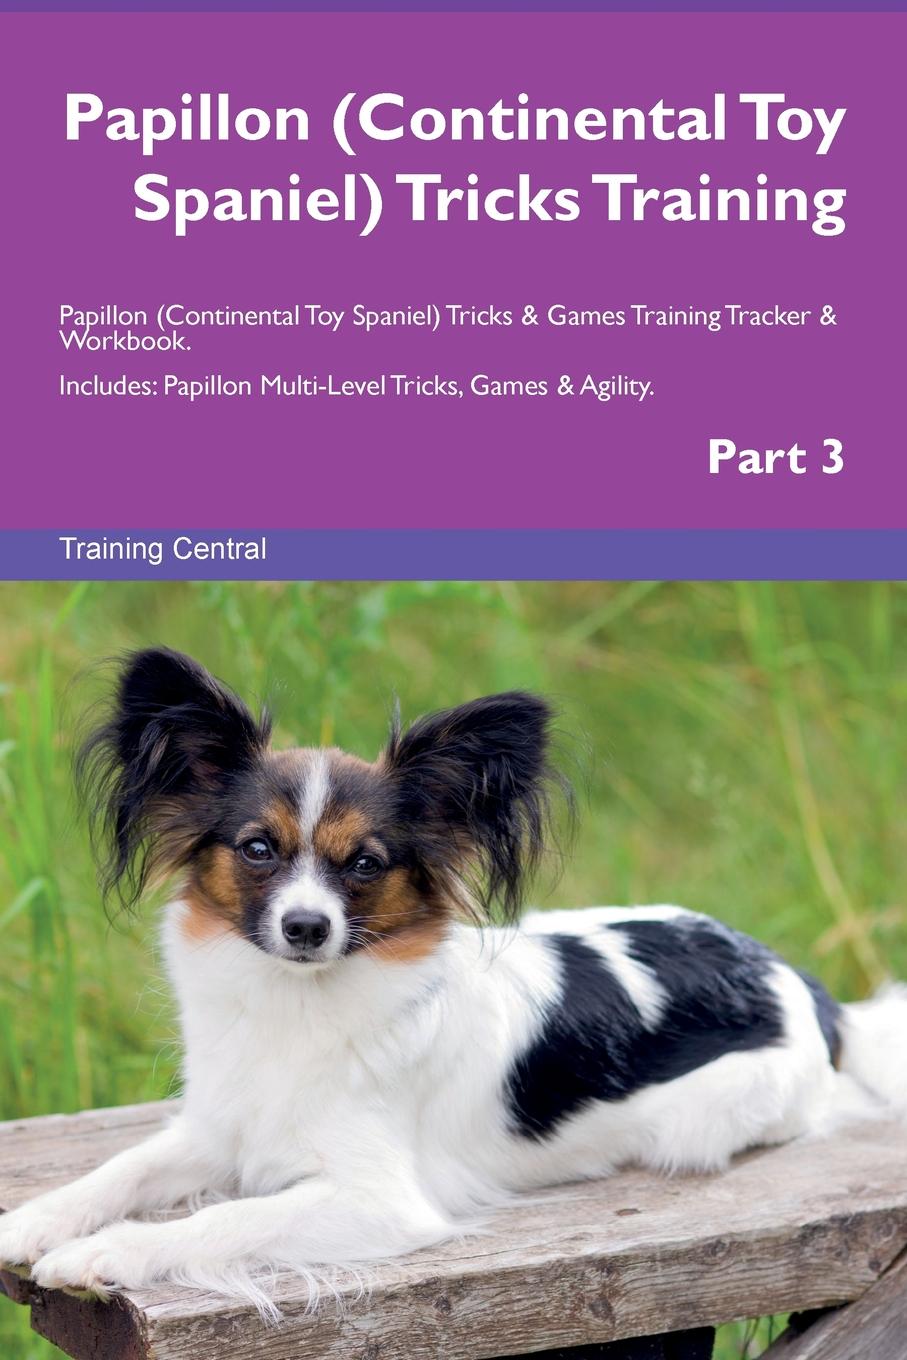 Training Central Papillon (Continental Toy Spaniel) Tricks Training Papillon (Continental Toy Spaniel) Tricks . Games Training Tracker . Workbook. Includes. Papillon Multi-Level Tricks, Games . Agility. Part 3